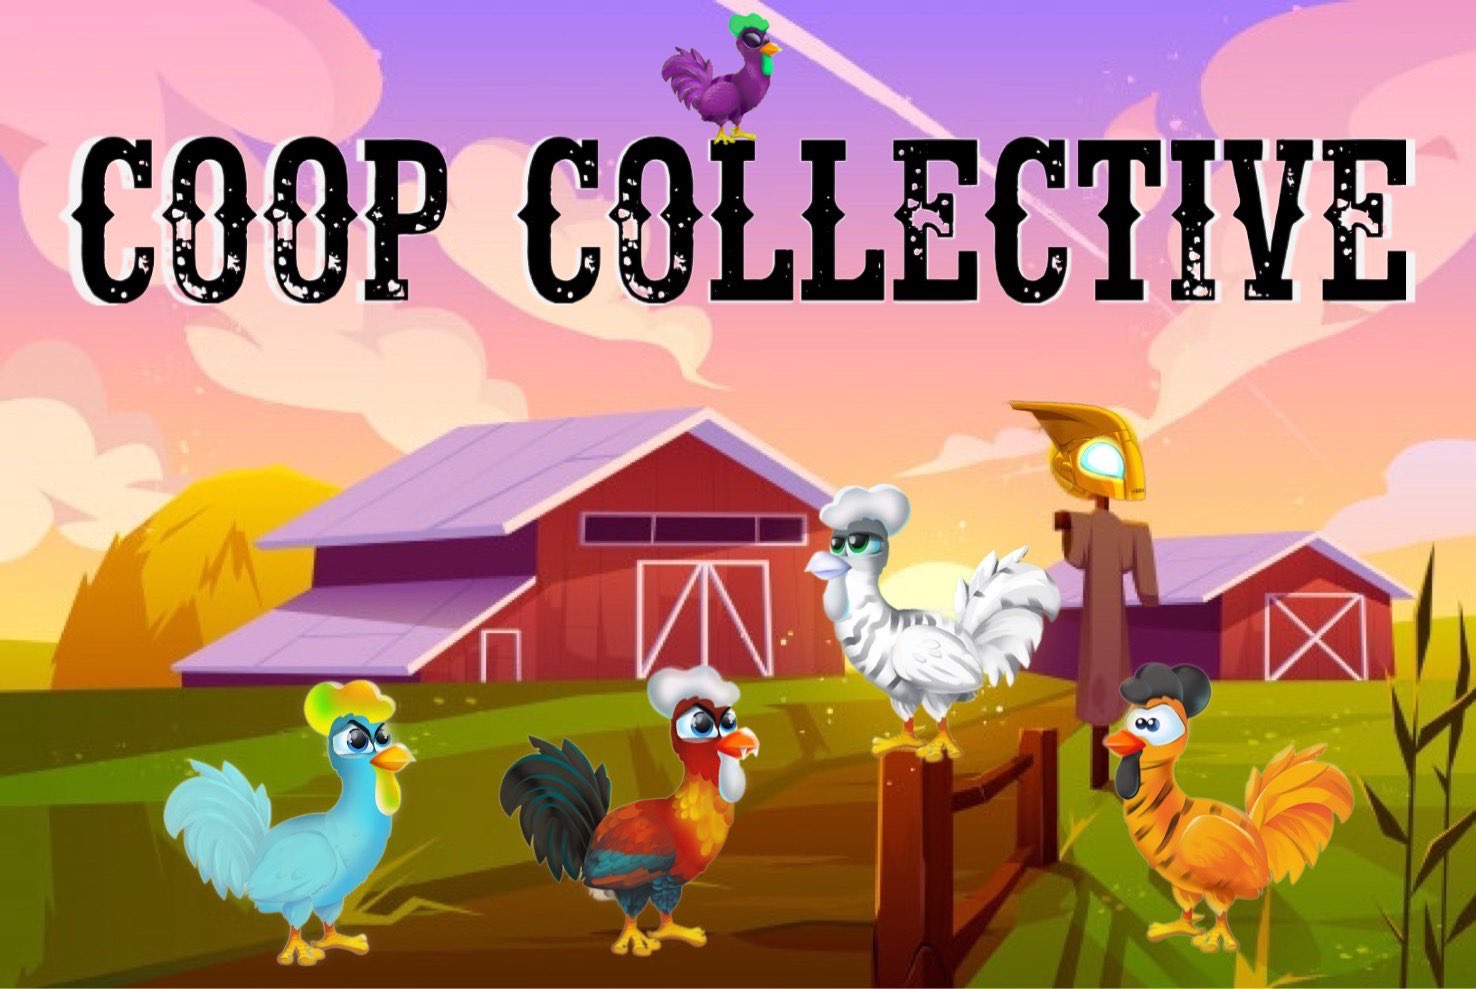 The Coop Collective